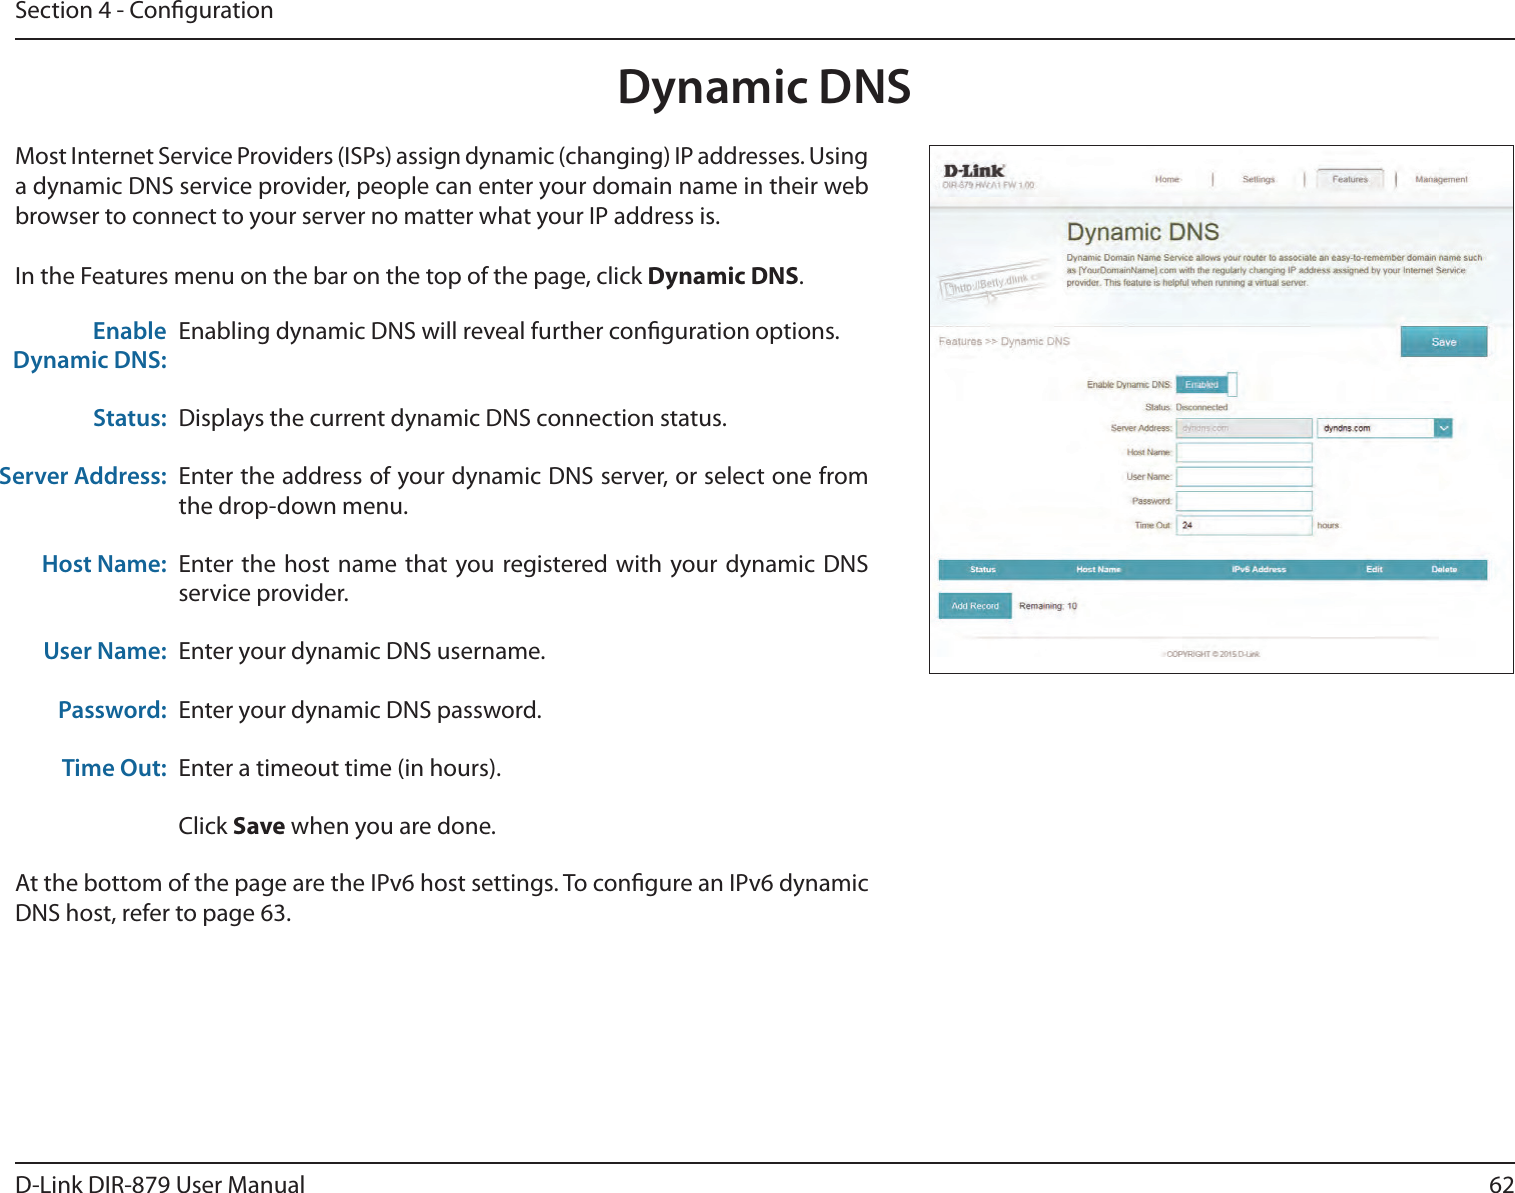 62D-Link DIR-879 User ManualSection 4 - CongurationDynamic DNSMost Internet Service Providers (ISPs) assign dynamic (changing) IP addresses. Using a dynamic DNS service provider, people can enter your domain name in their web browser to connect to your server no matter what your IP address is.In the Features menu on the bar on the top of the page, click Dynamic DNS.Enabling dynamic DNS will reveal further conguration options.Displays the current dynamic DNS connection status.Enter the address of your dynamic DNS server, or select one from the drop-down menu.Enter the host name that you registered with your dynamic DNS service provider.Enter your dynamic DNS username.Enter your dynamic DNS password.Enter a timeout time (in hours).Click Save when you are done.Enable Dynamic DNS:Status:Server Address:Host Name:User Name:Password:Time Out:At the bottom of the page are the IPv6 host settings. To congure an IPv6 dynamic DNS host, refer to page 63.